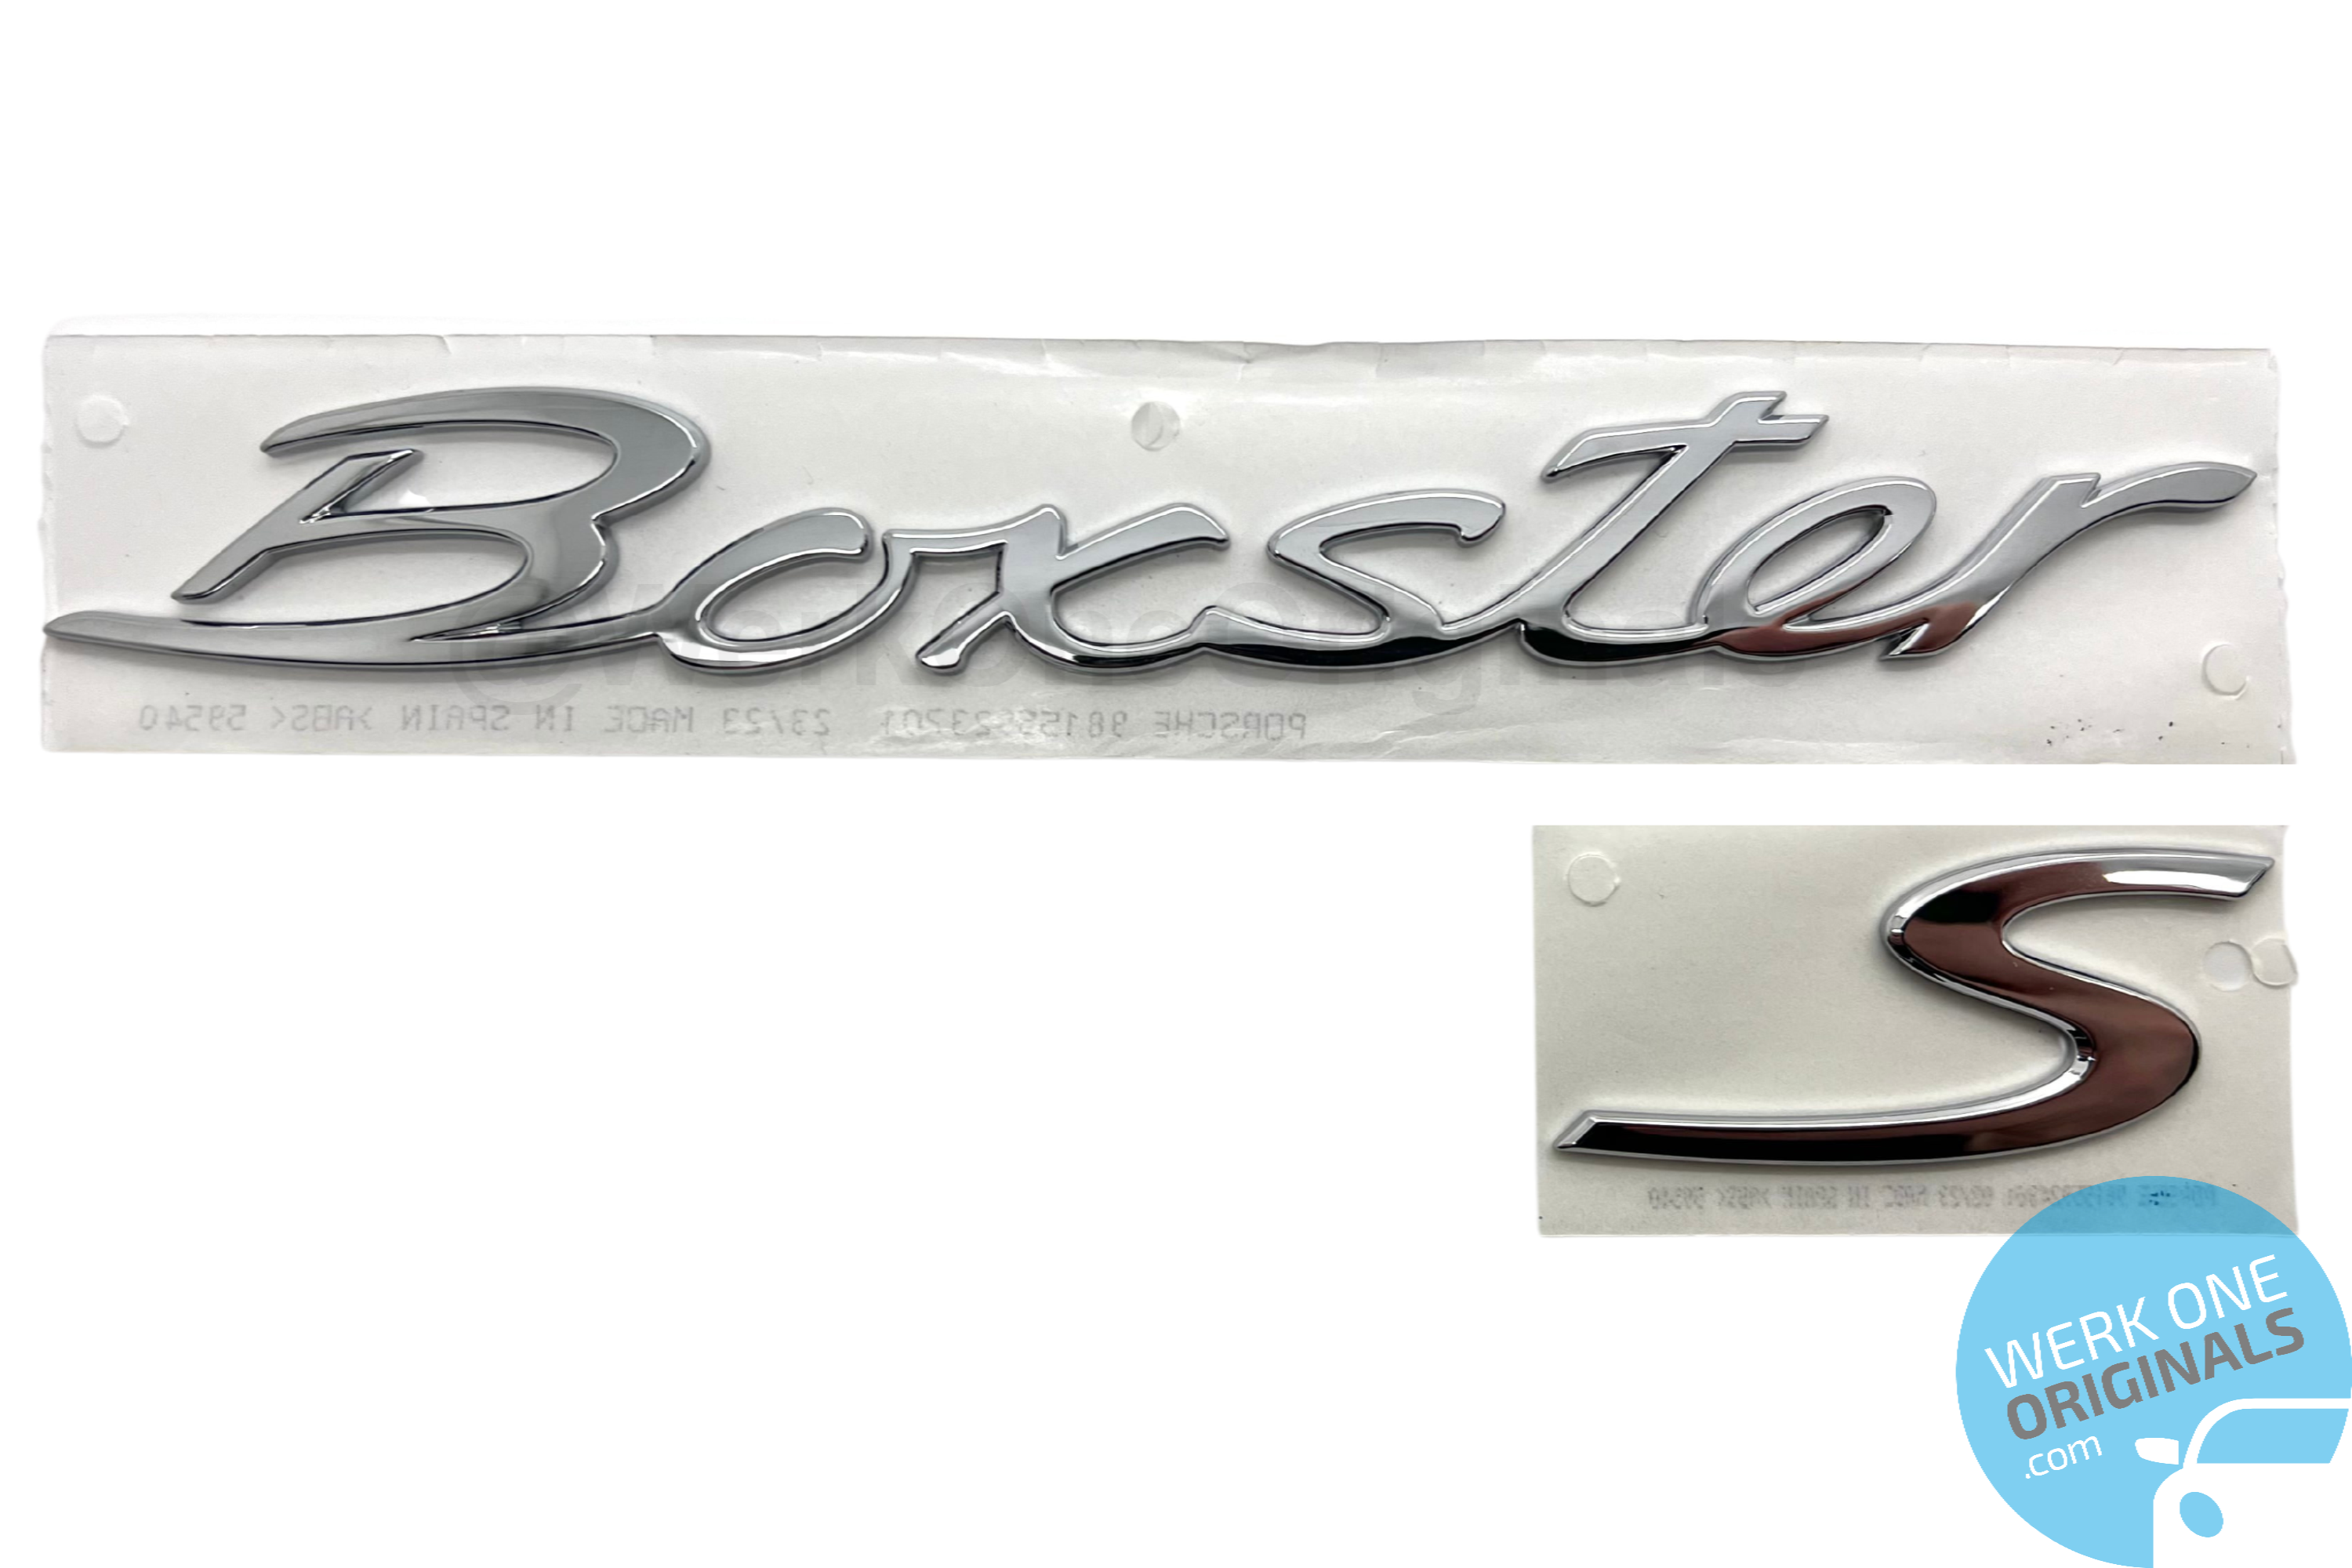 Porsche Official 'Boxster S' Rear Badge Decal in Chrome Silver for Boxster S Type 718 Models